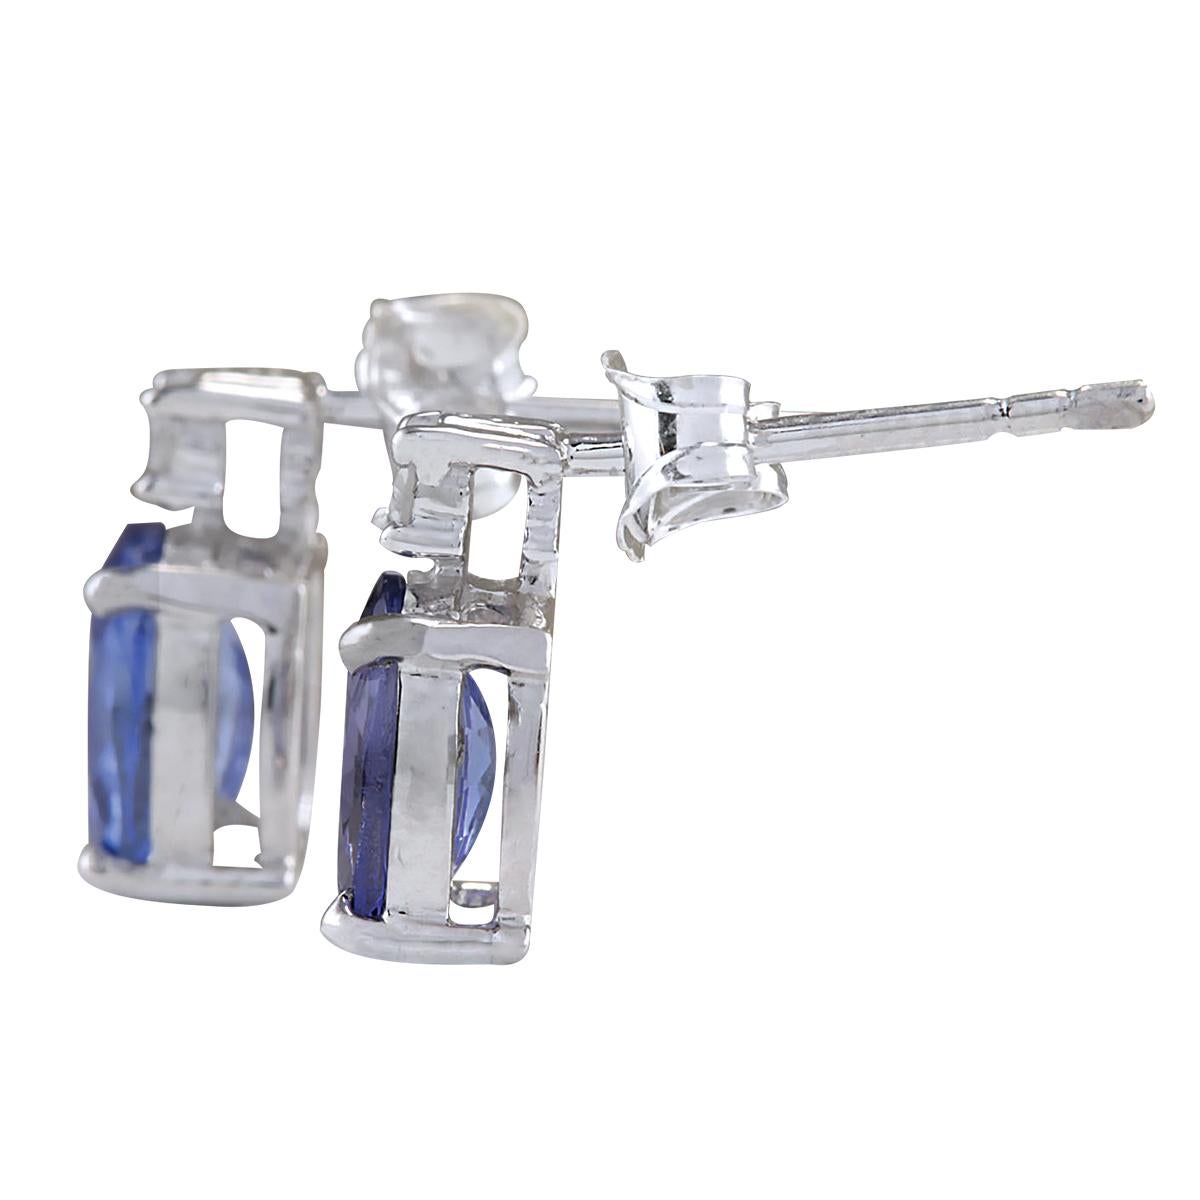 Stamped: 14K White Gold
Total Earrings Weight: 1.4 Grams
Total Natural Tanzanite Weight is 1.67 Carat (Measures: 7.00x5.00 mm)
Color: Blue
Total Natural Diamond Weight is 0.06 Carat
Color: F-G, Clarity: VS2-SI1
Face Measures: 9.95x5.10 mm
Sku: